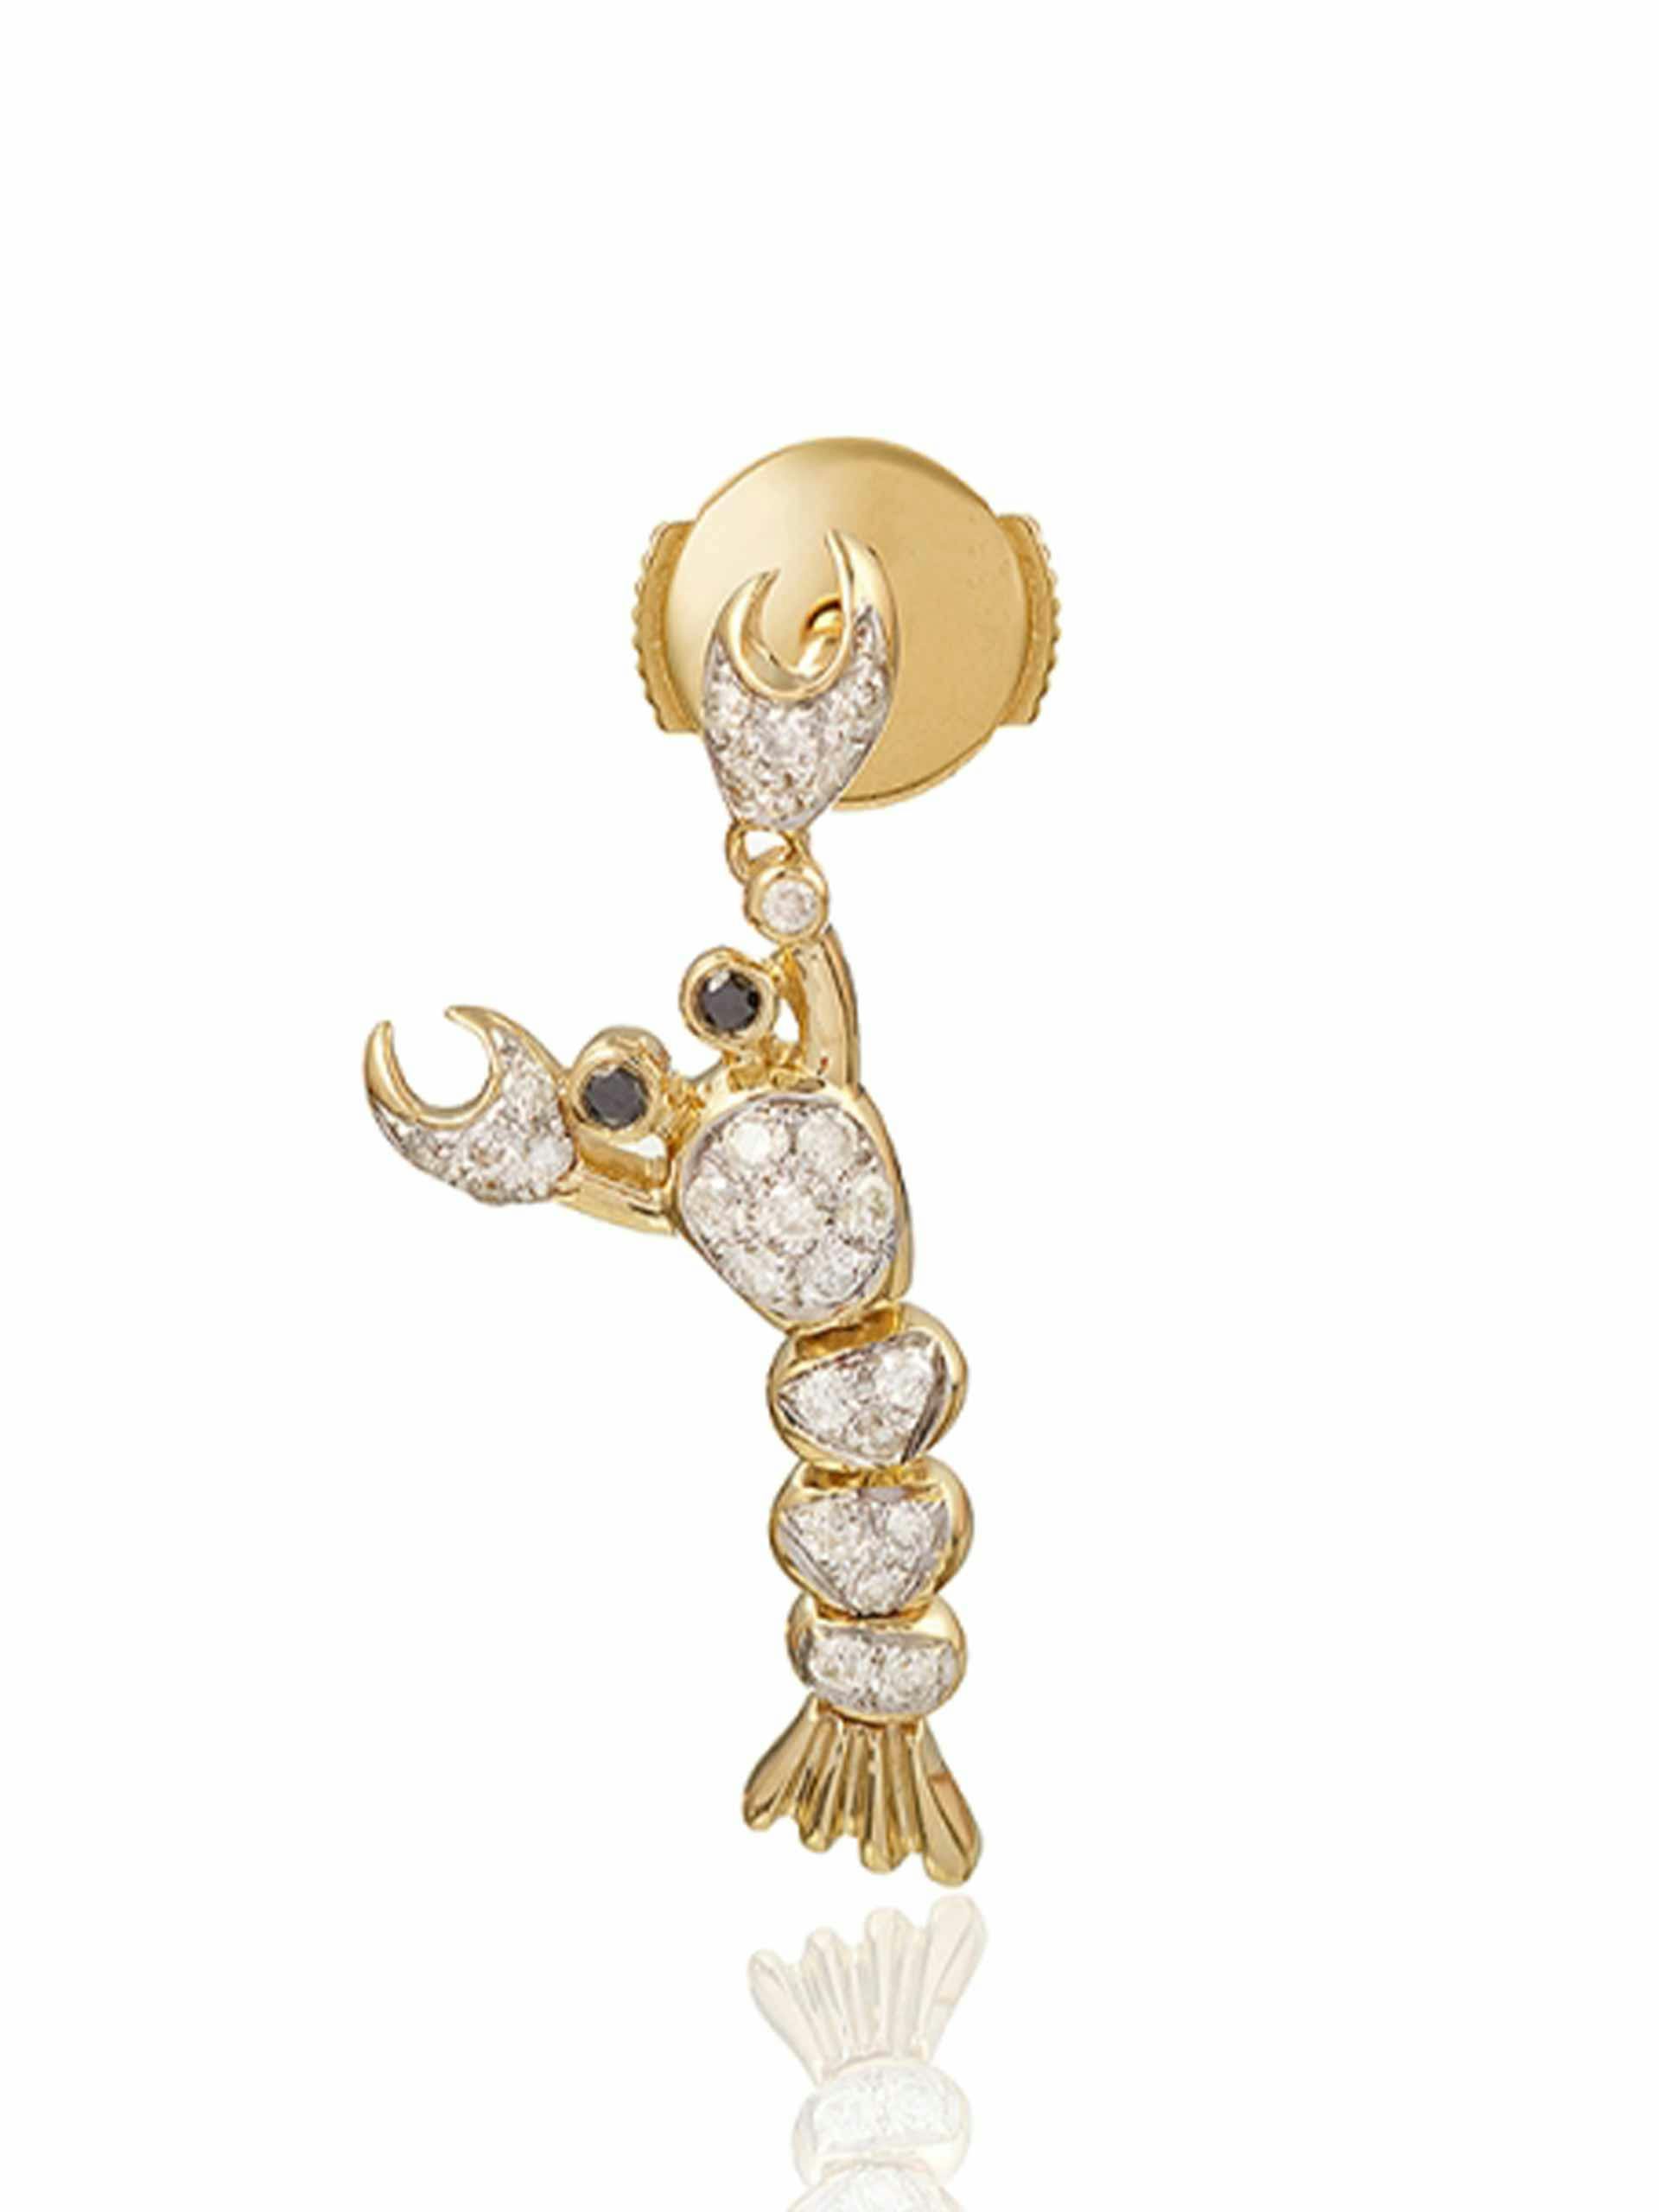 Gold and diamond earring